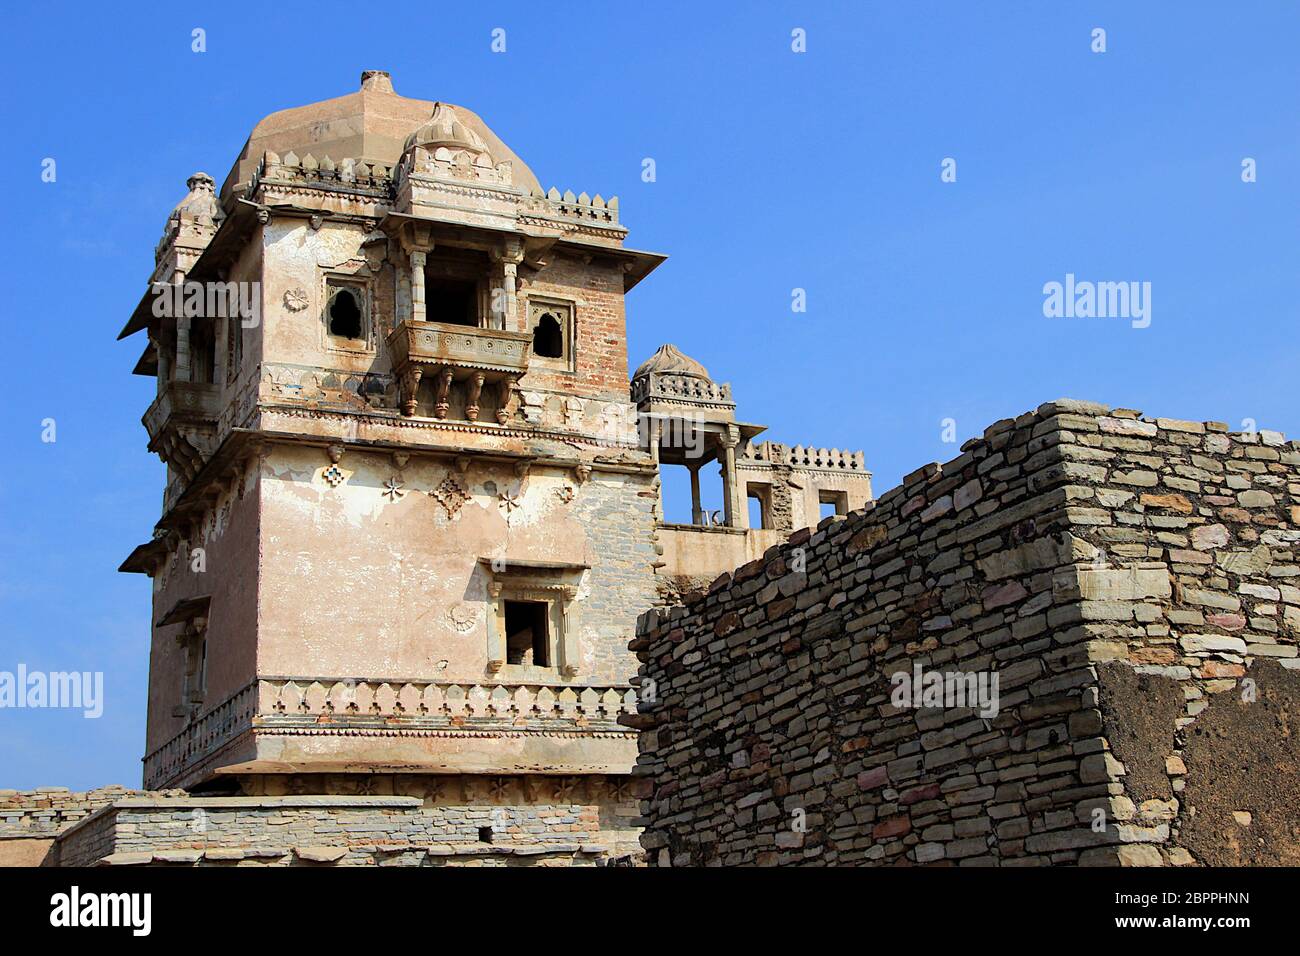 Closer view of upper story and balcony at Kumbh Mahal Palace, Chittorgarh Fort, Rajasthan, India, Asia Stock Photo